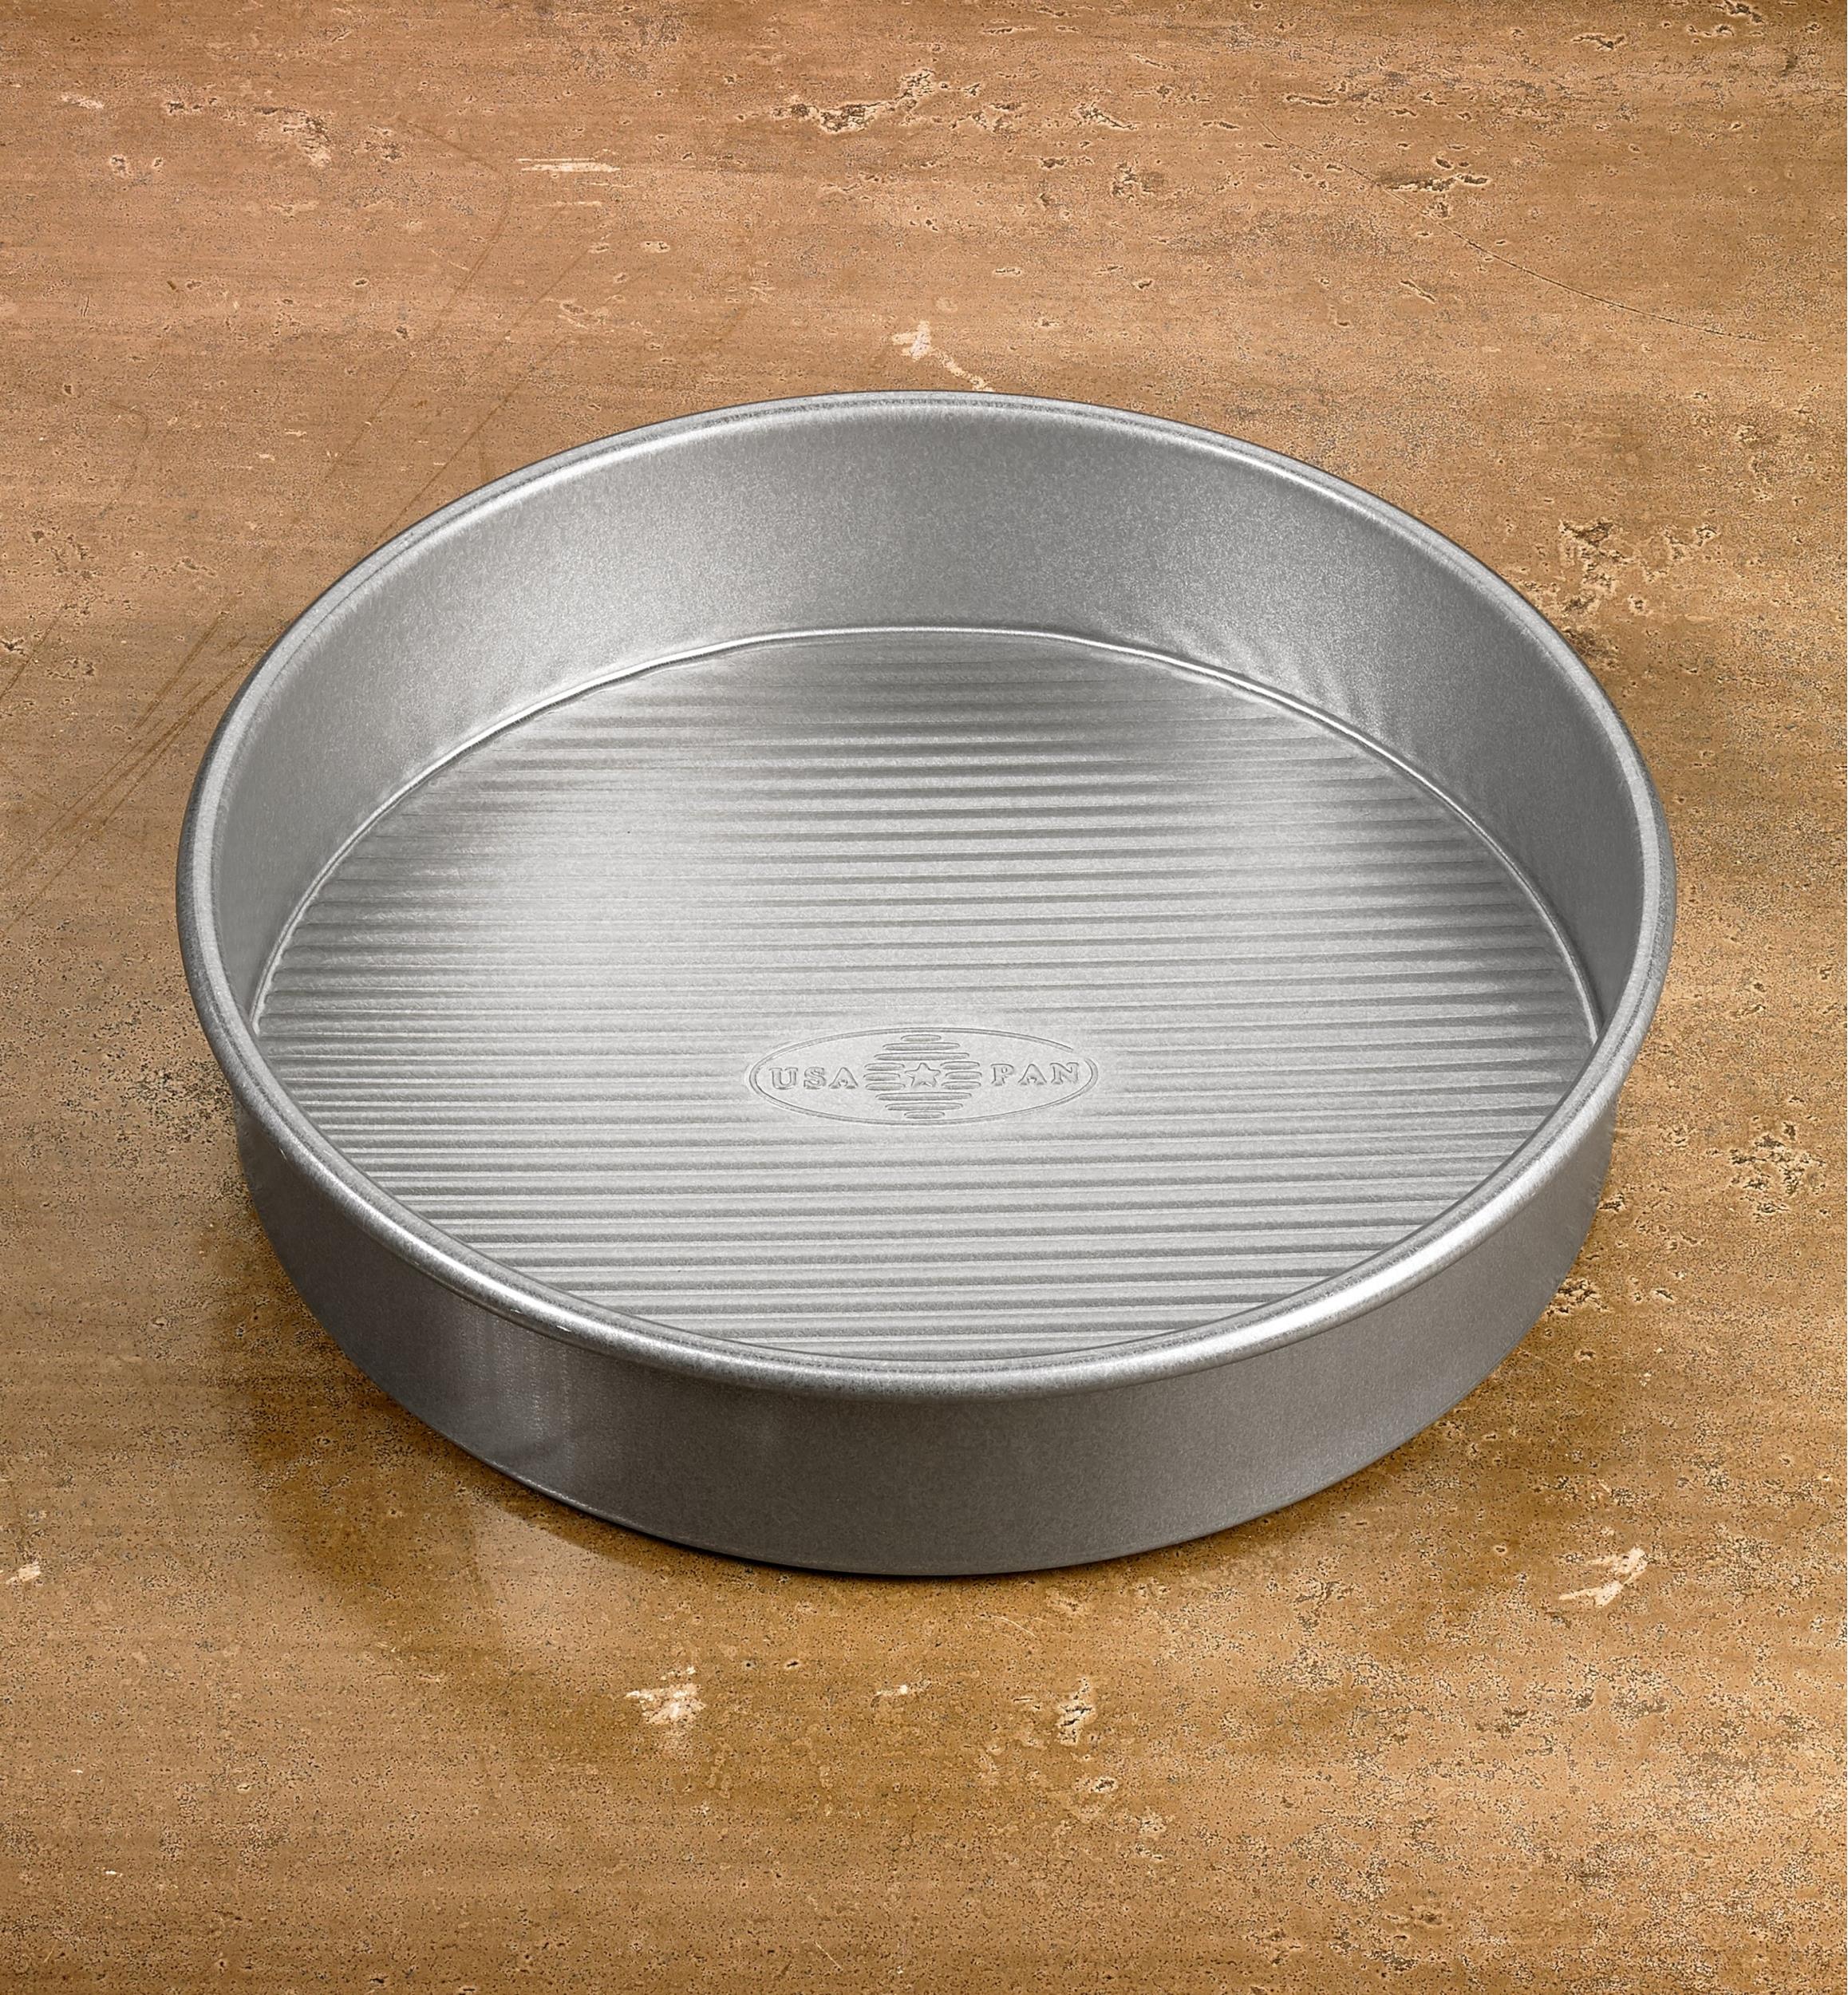 Cooperhead Collection Round Cake Pan 9 Inch - 1 ea